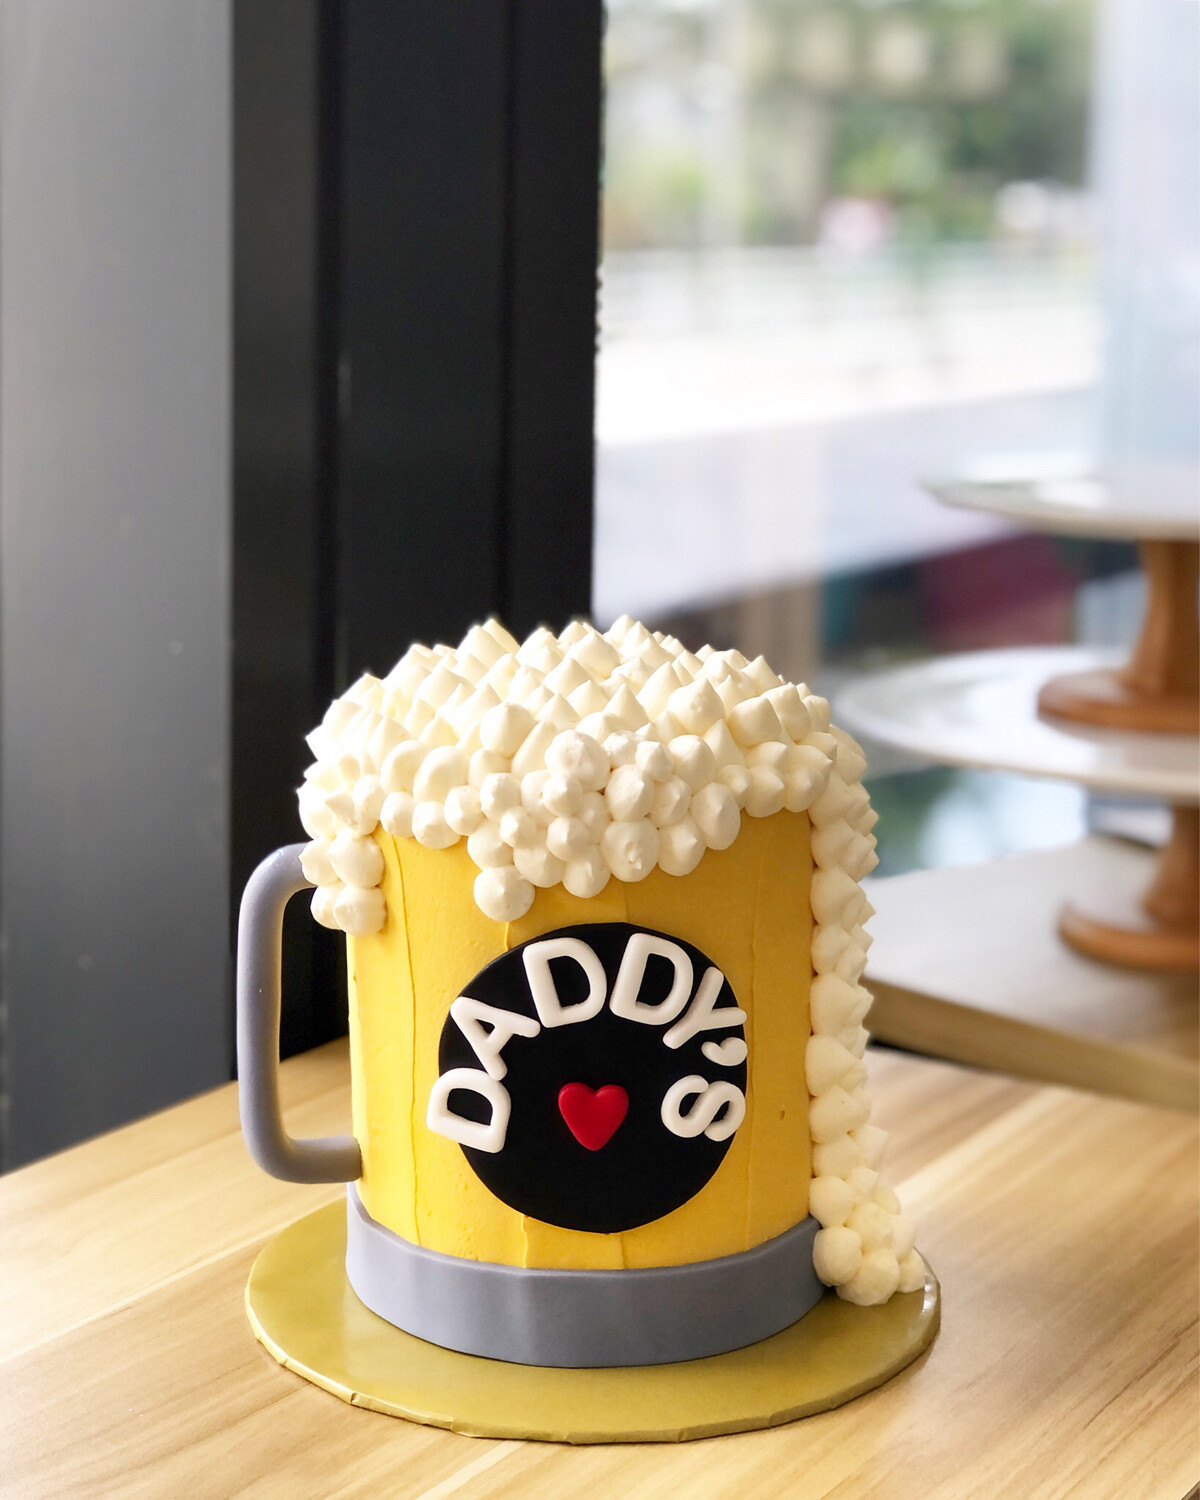 Fathers’ Day - Beer Design Cake 2 (no Alcohol)